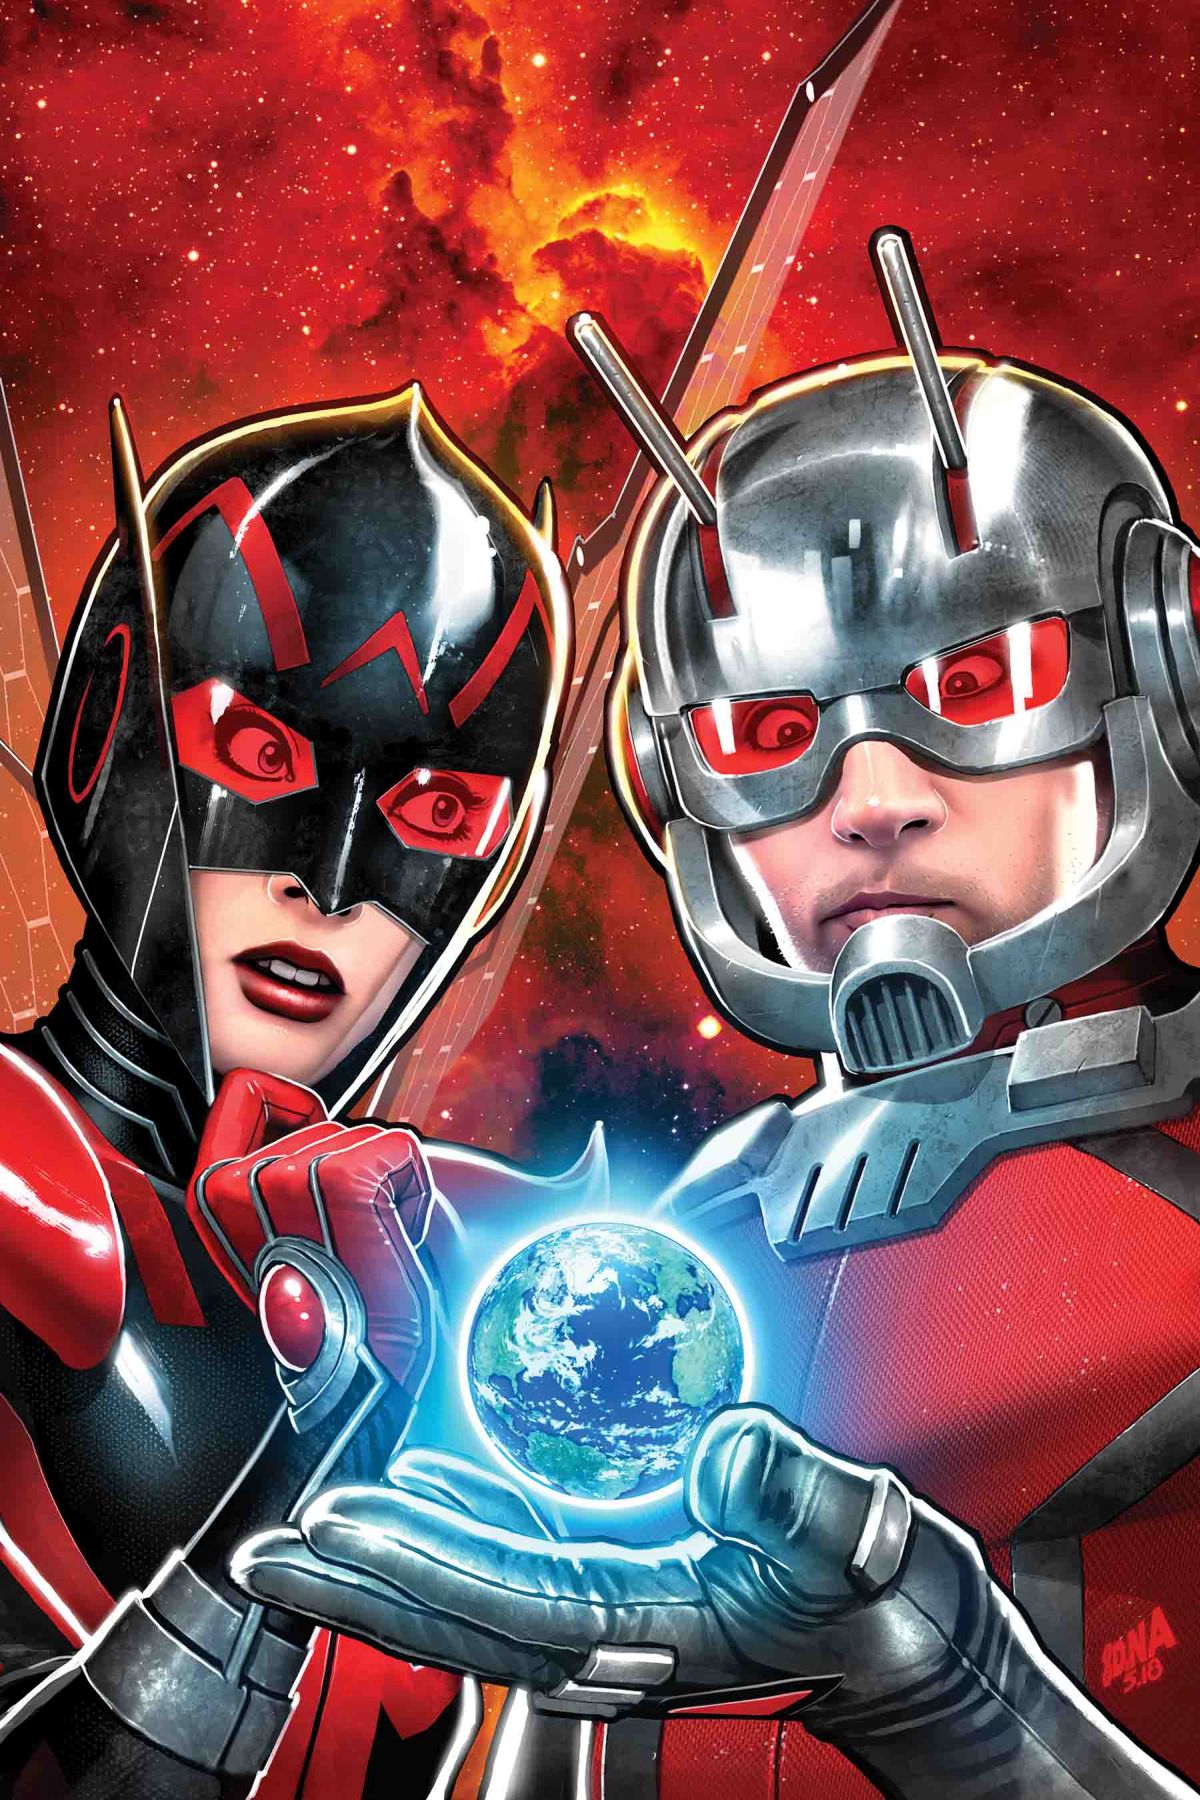 ANT-MAN & THE WASP #5 (of 5) 